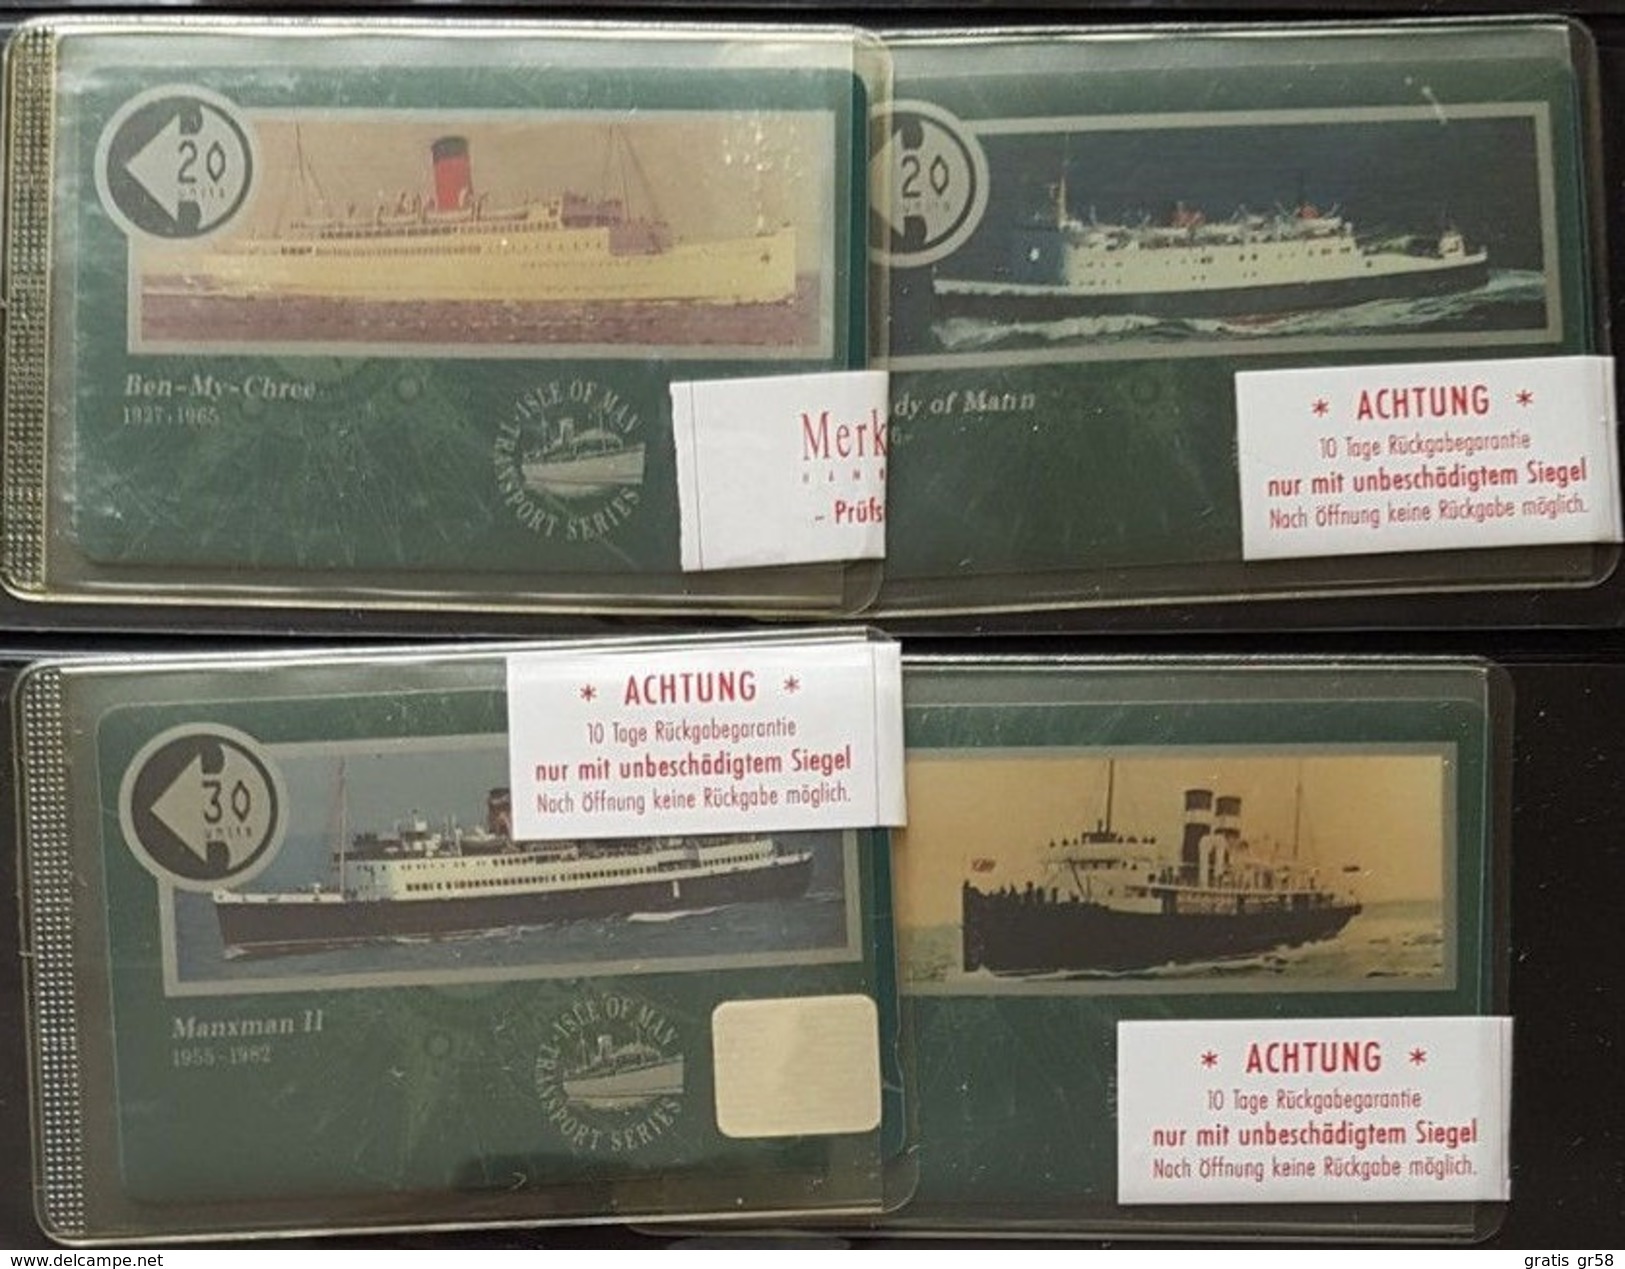 Isle Of Man - GPT, 10IOMA/B/C/D, Ships, Transport Series, Complete Set 4 Cards, 1991, Mint - Isle Of Man